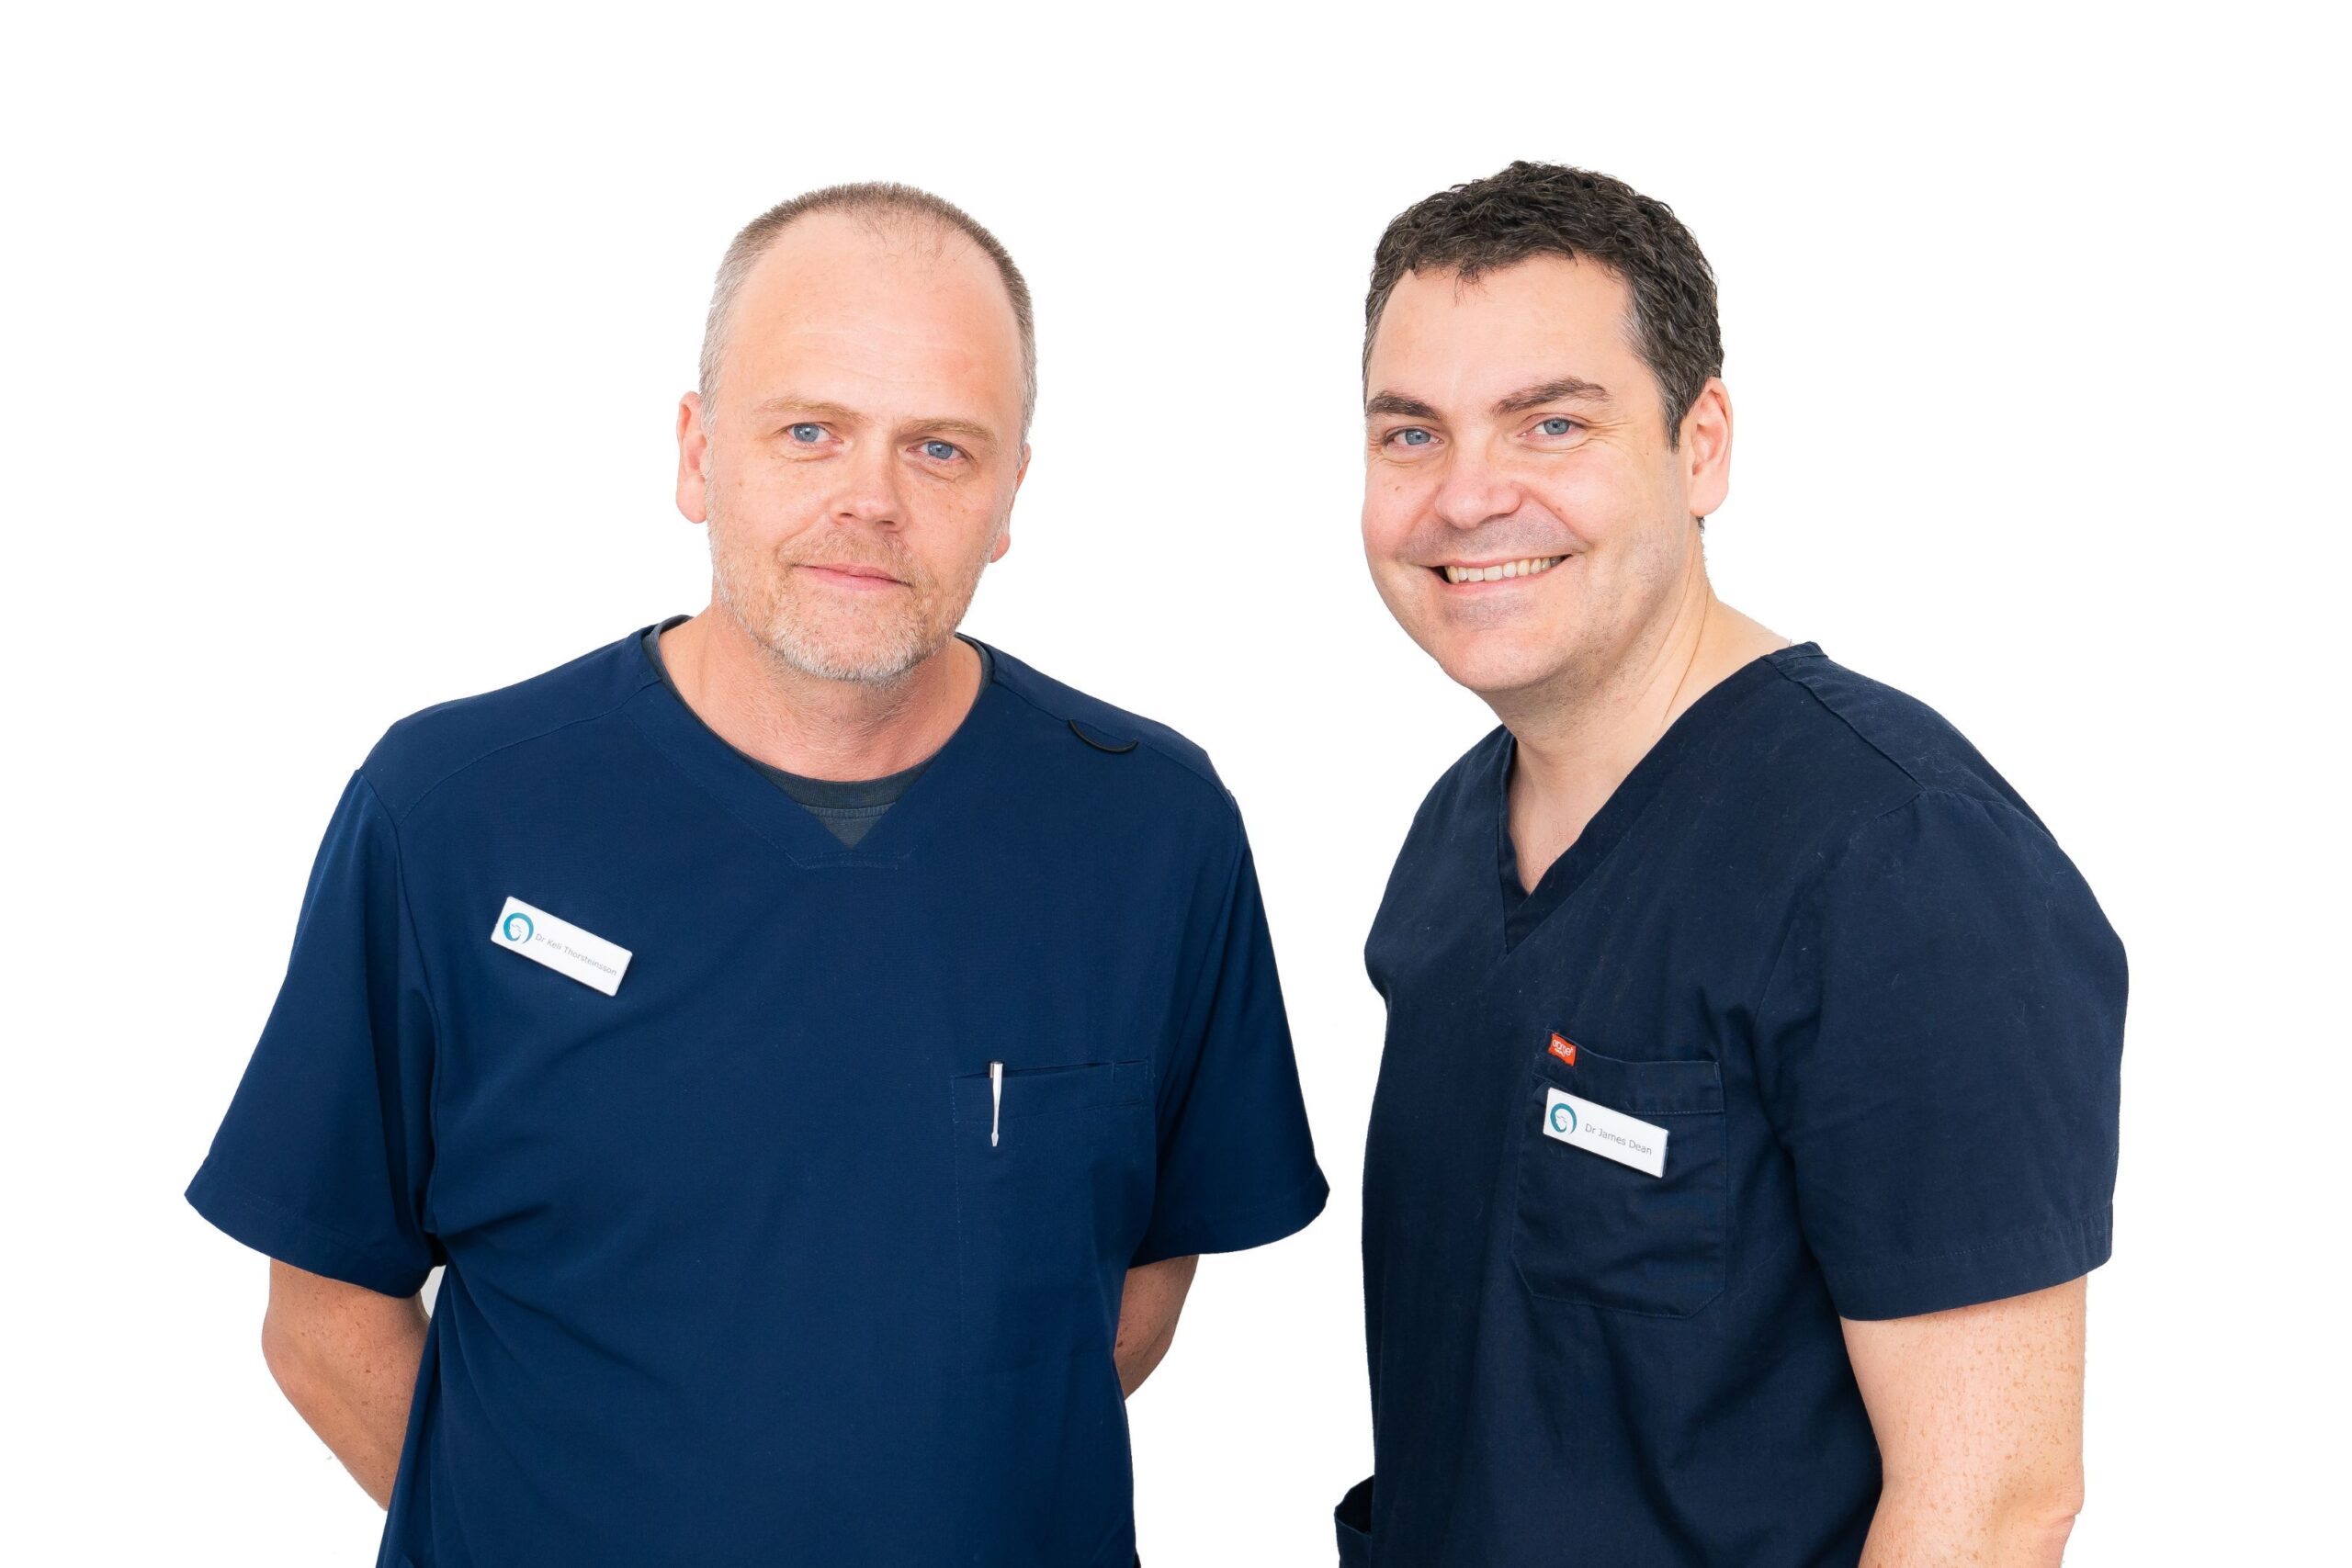 Dermatology Experts Dr Thorsteinsson (left) and Dr Dean (right) at Freyja Medical